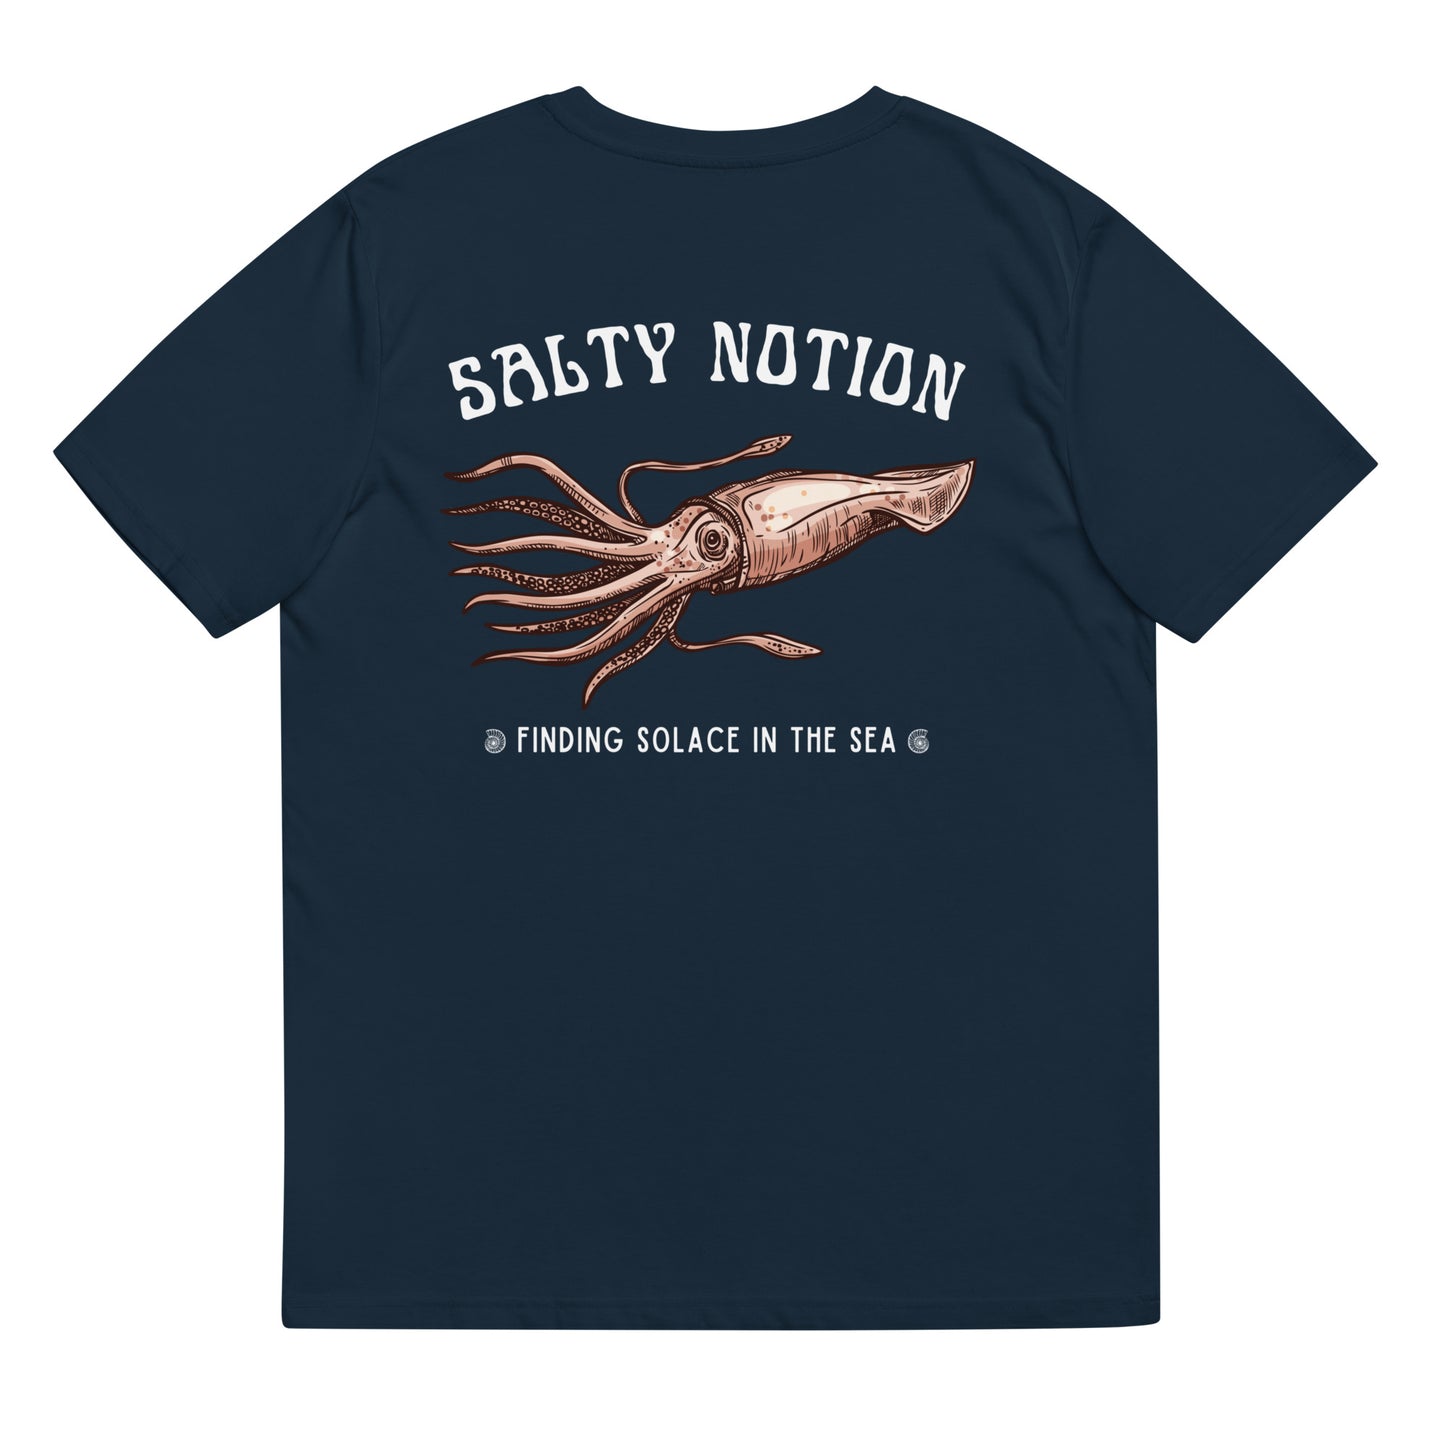 Finding solace in the sea organic cotton t-shirt